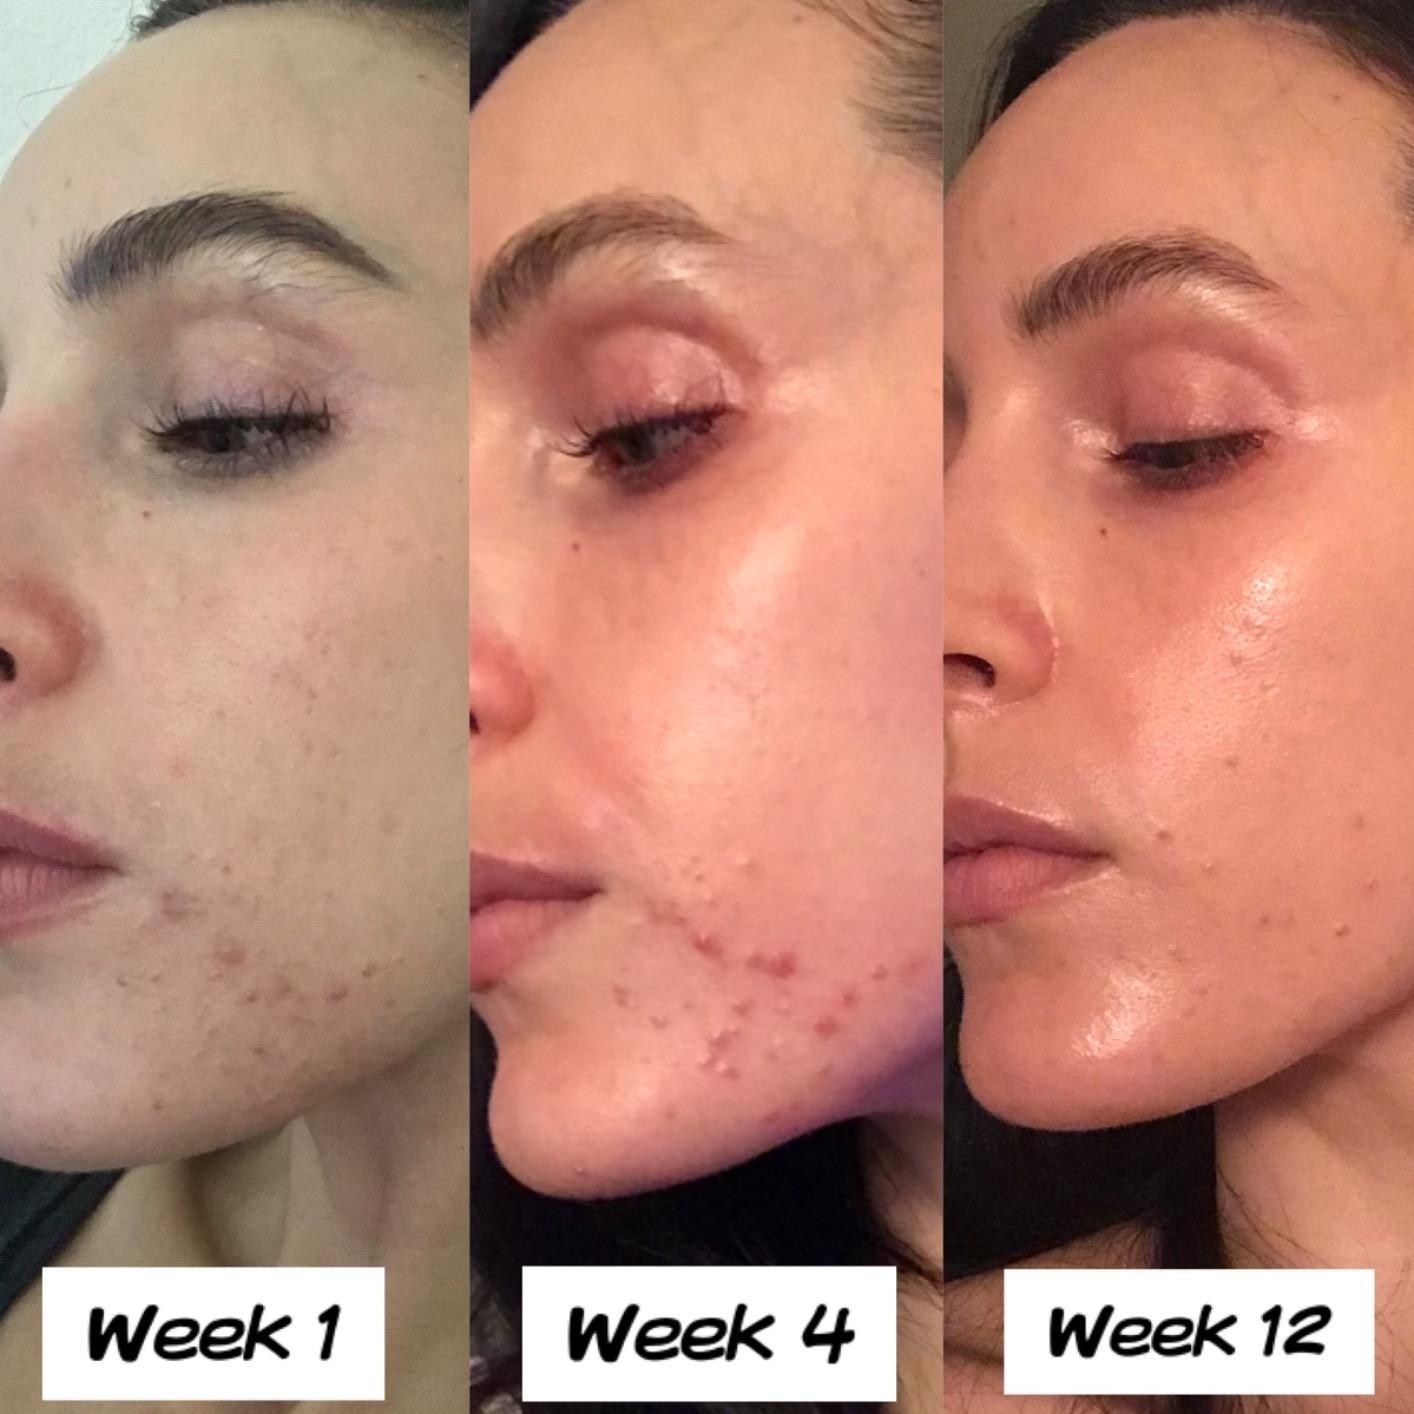 Reviewer photo showing results of using Differin gel over 12 weeks